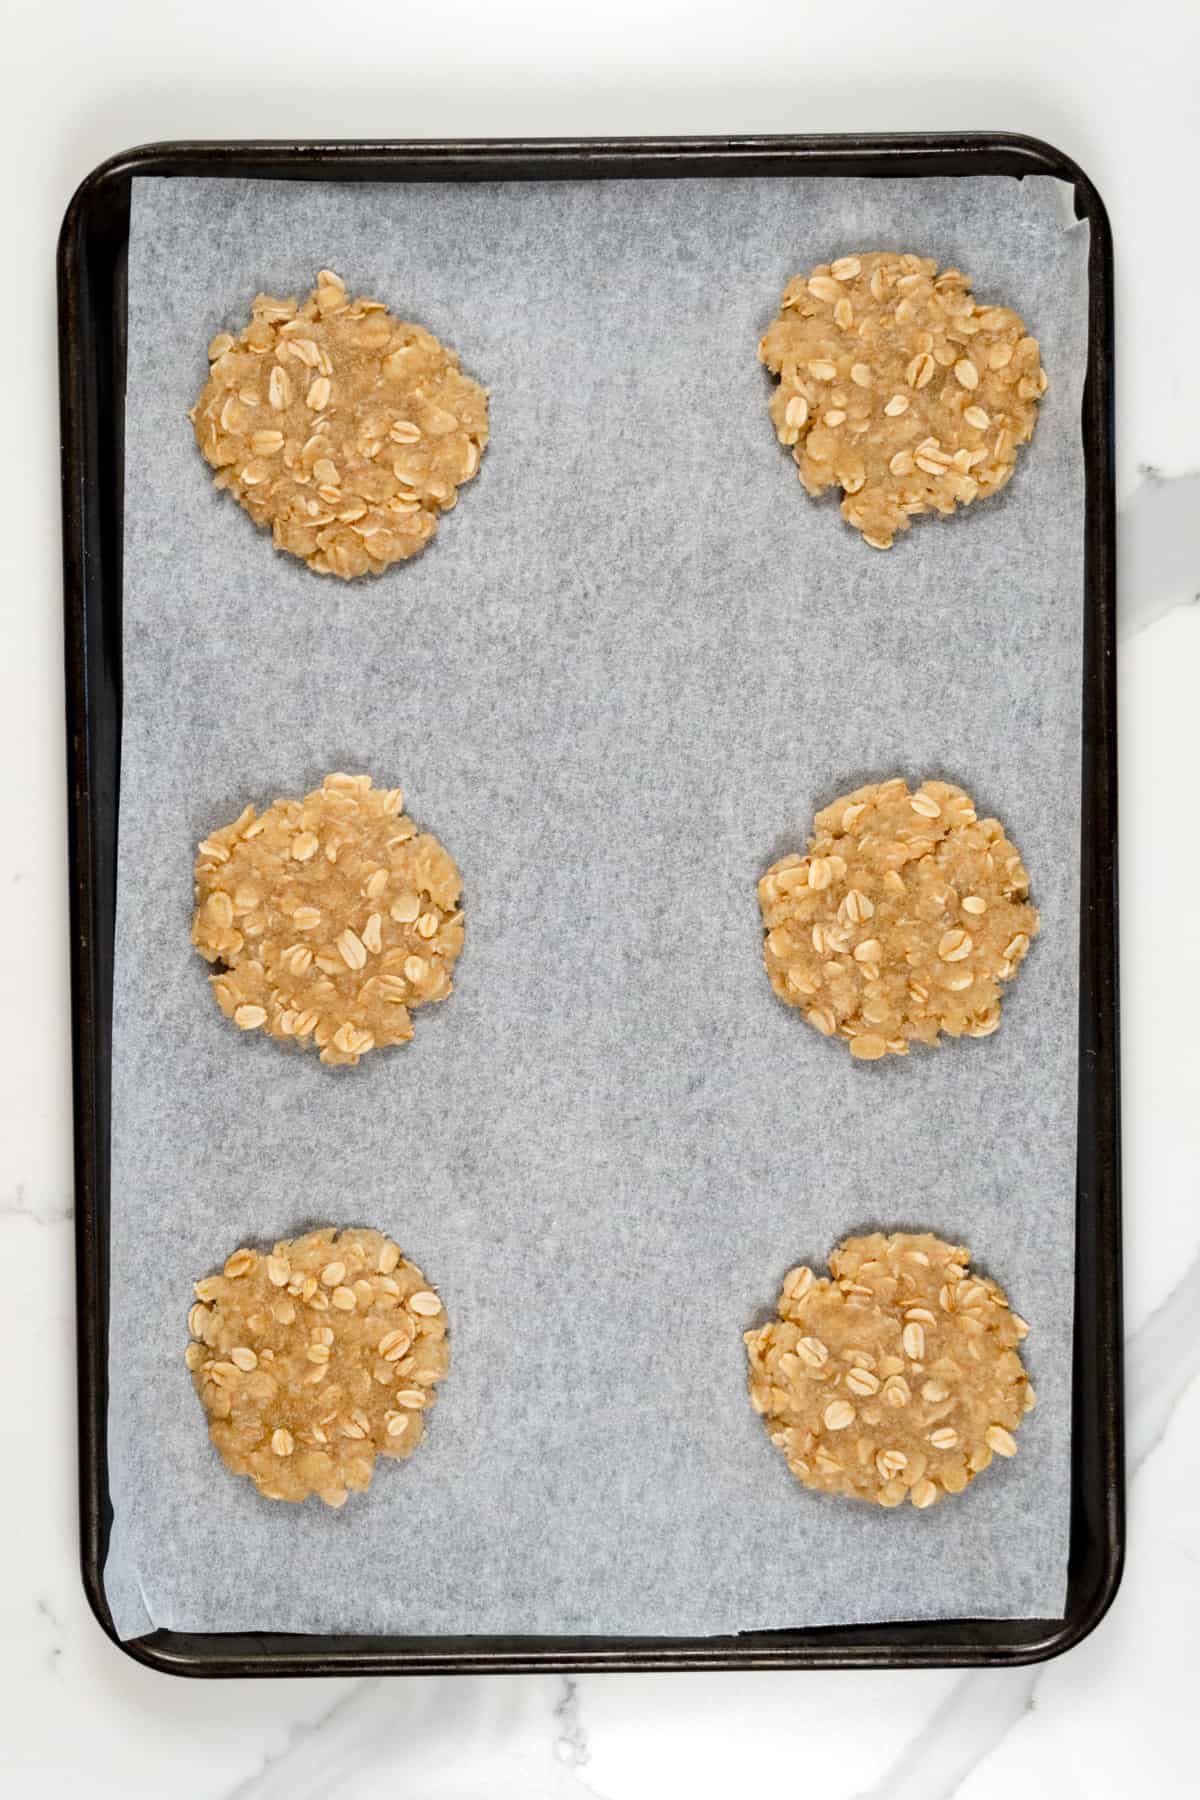 raw ANZAC biscuits in a paper lined tray